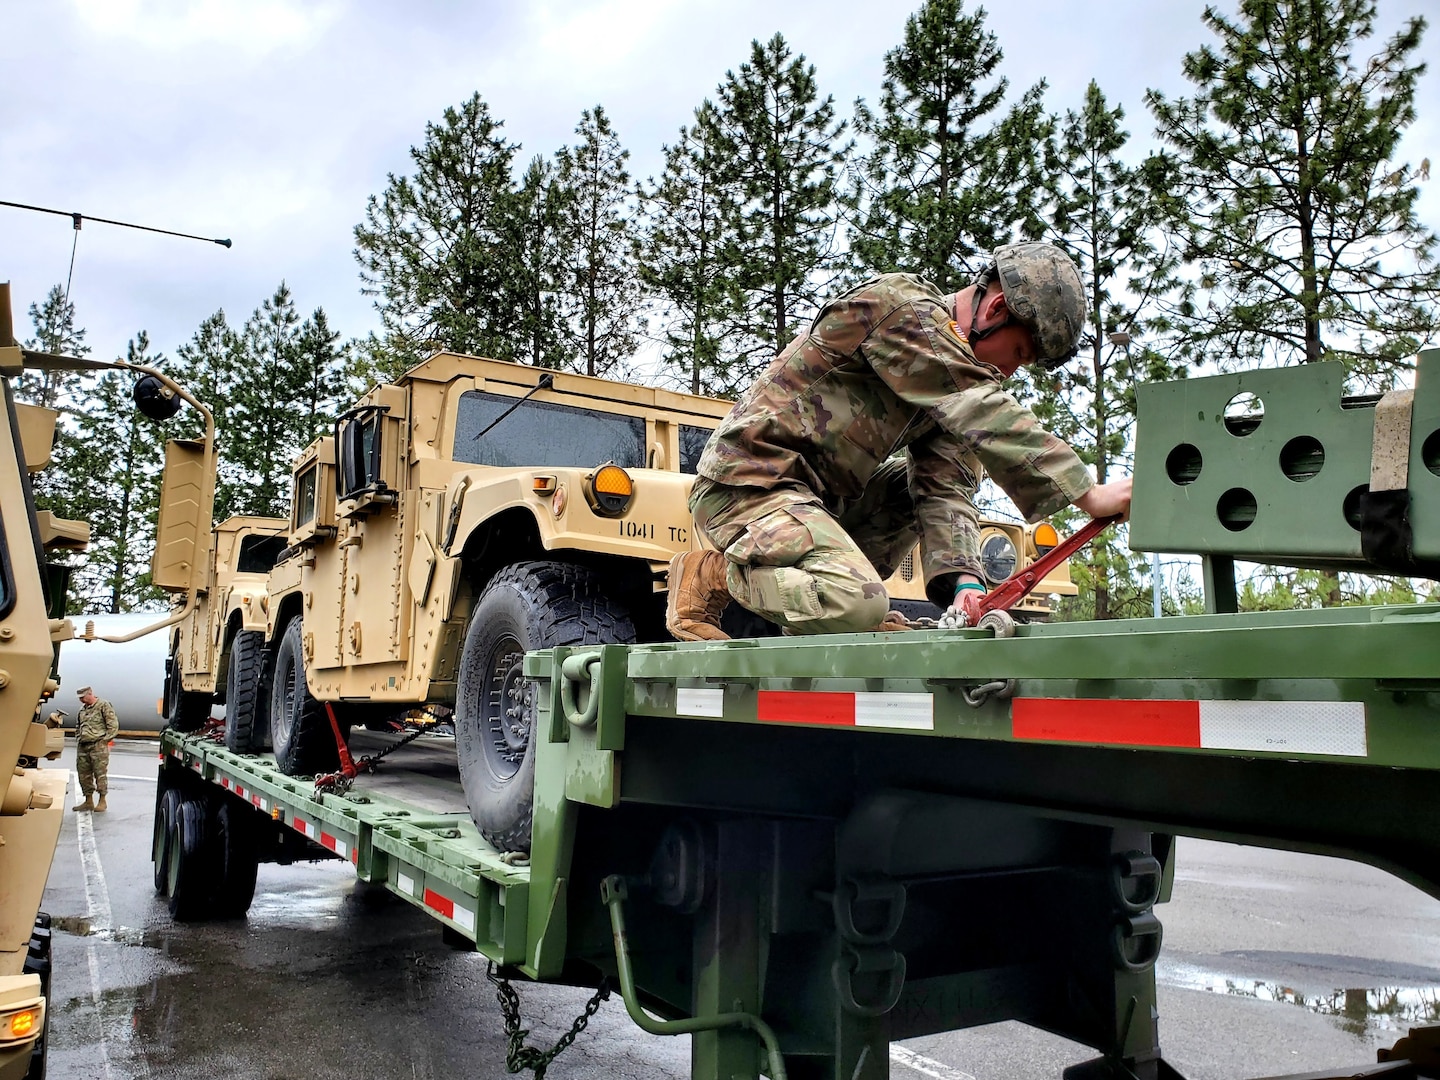 A Washington National Guard member of the 1041st Transportation Company ensures equipment is tied down before departing Fairchild Air Force Base, Wash., June 7, 2021, for annual training at Fort Harrison, Montana.